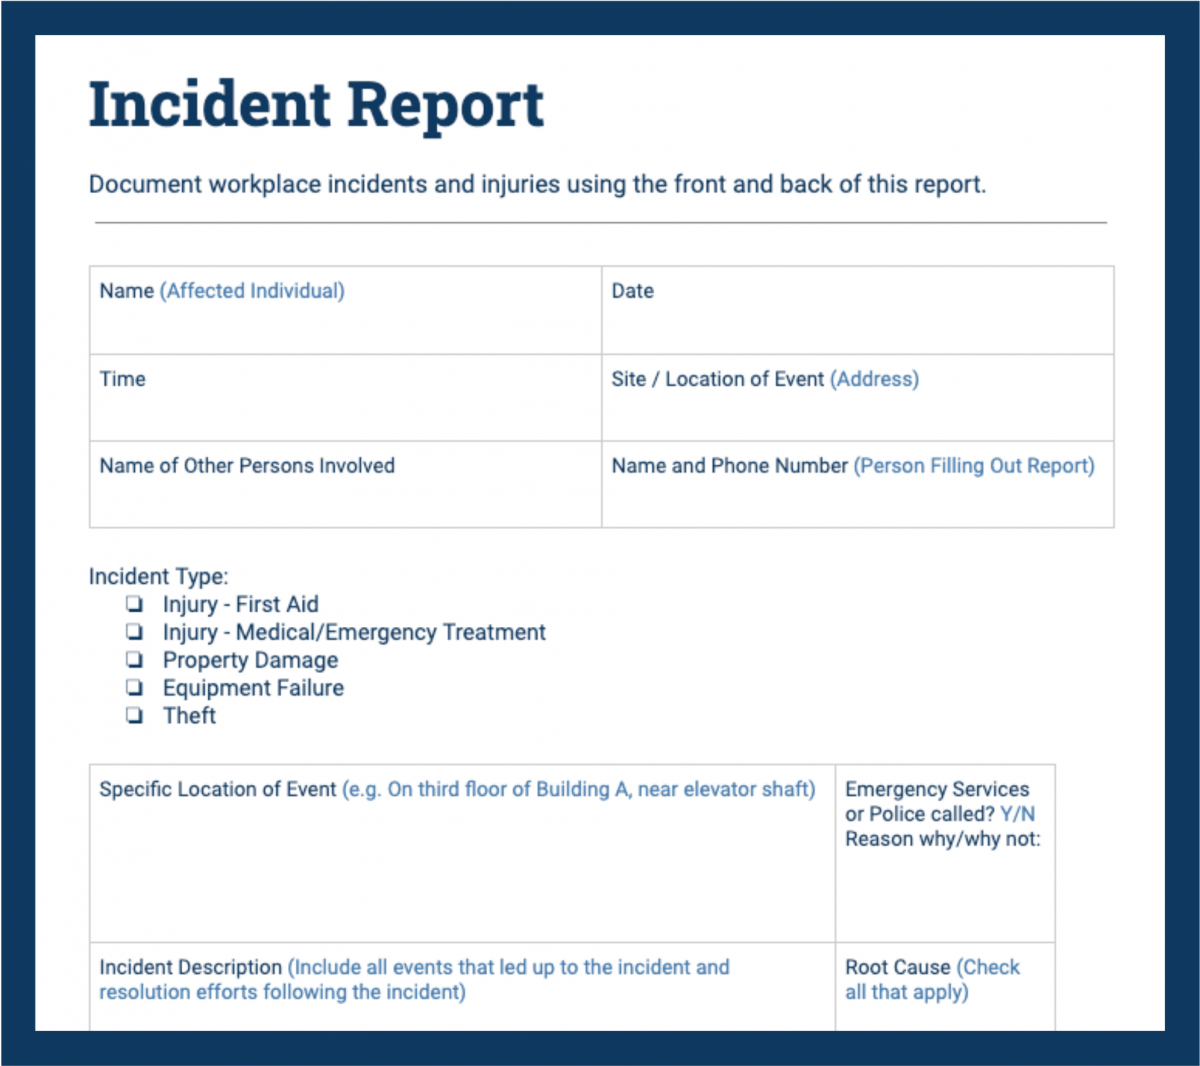 Incident Report Samples to Help You Describe Accidents - Safesite For First Aid Incident Report Form Template